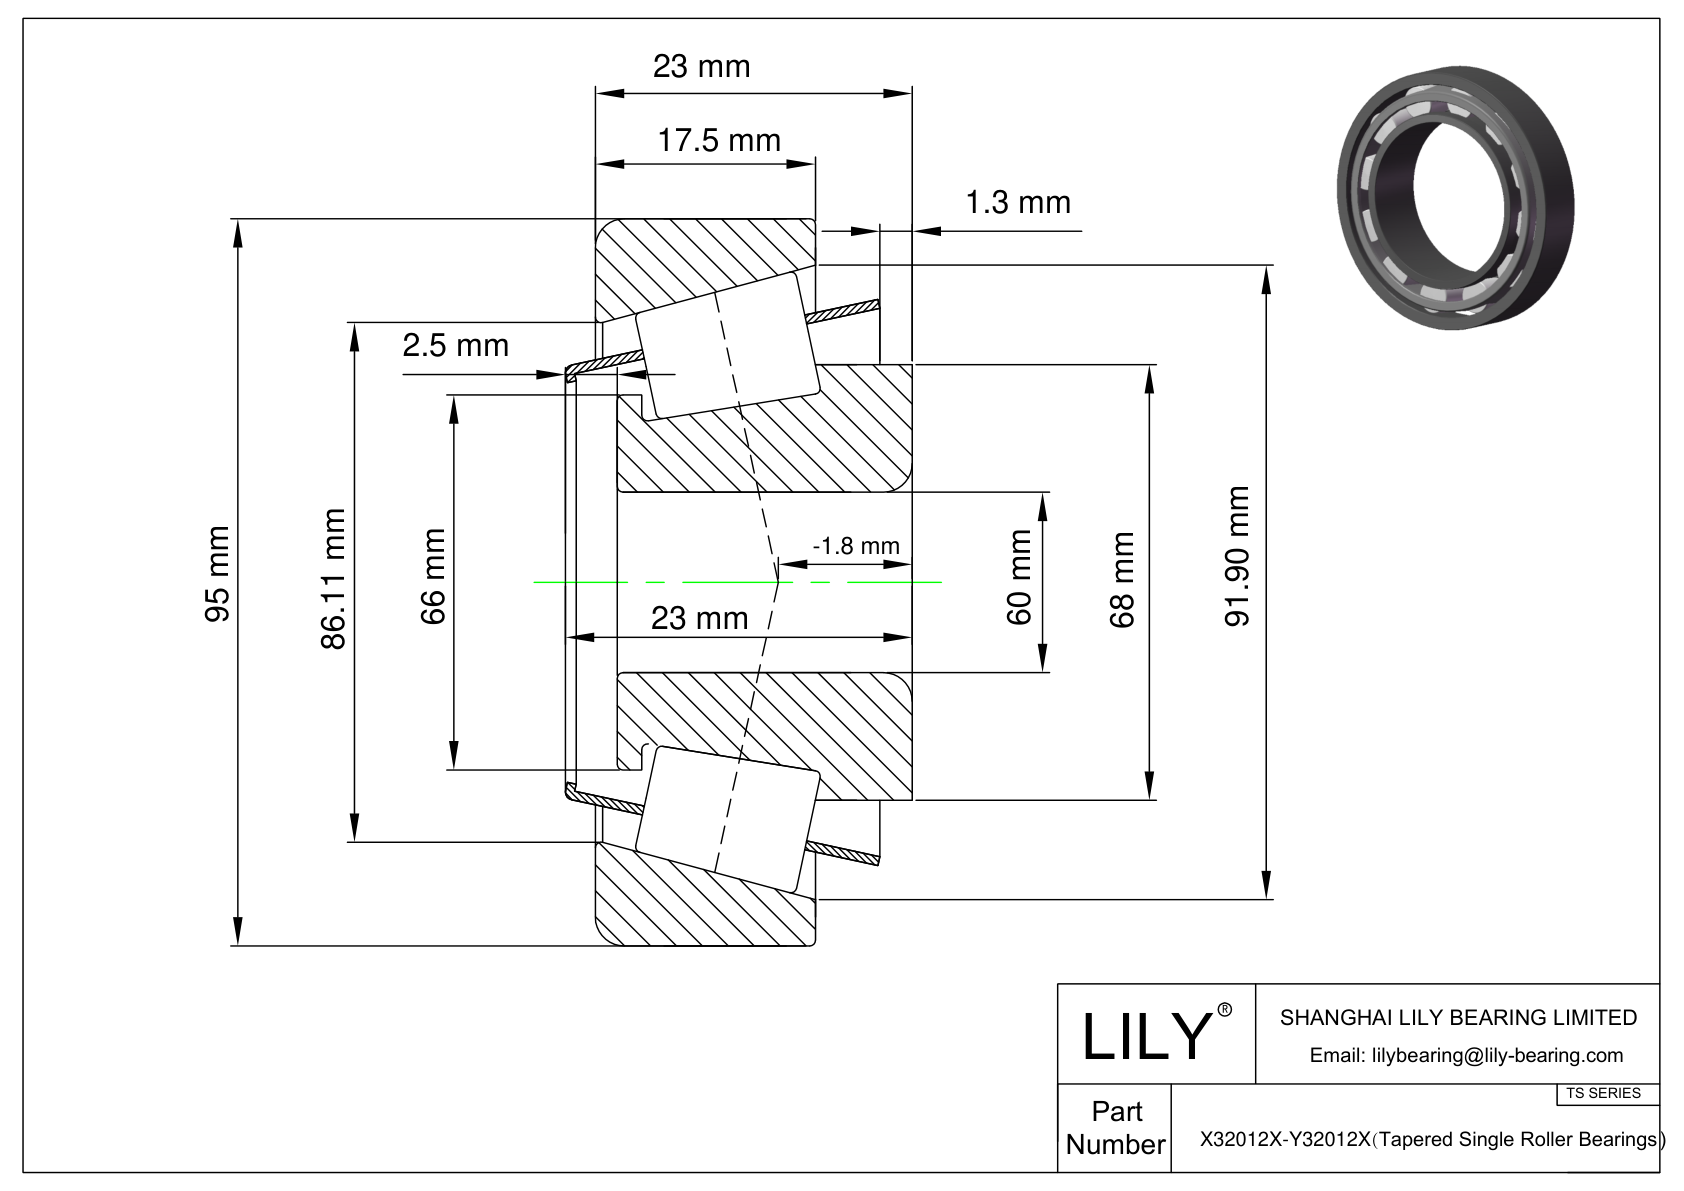 X32012X-Y32012X TS (Tapered Single Roller Bearings) (Metric) cad drawing